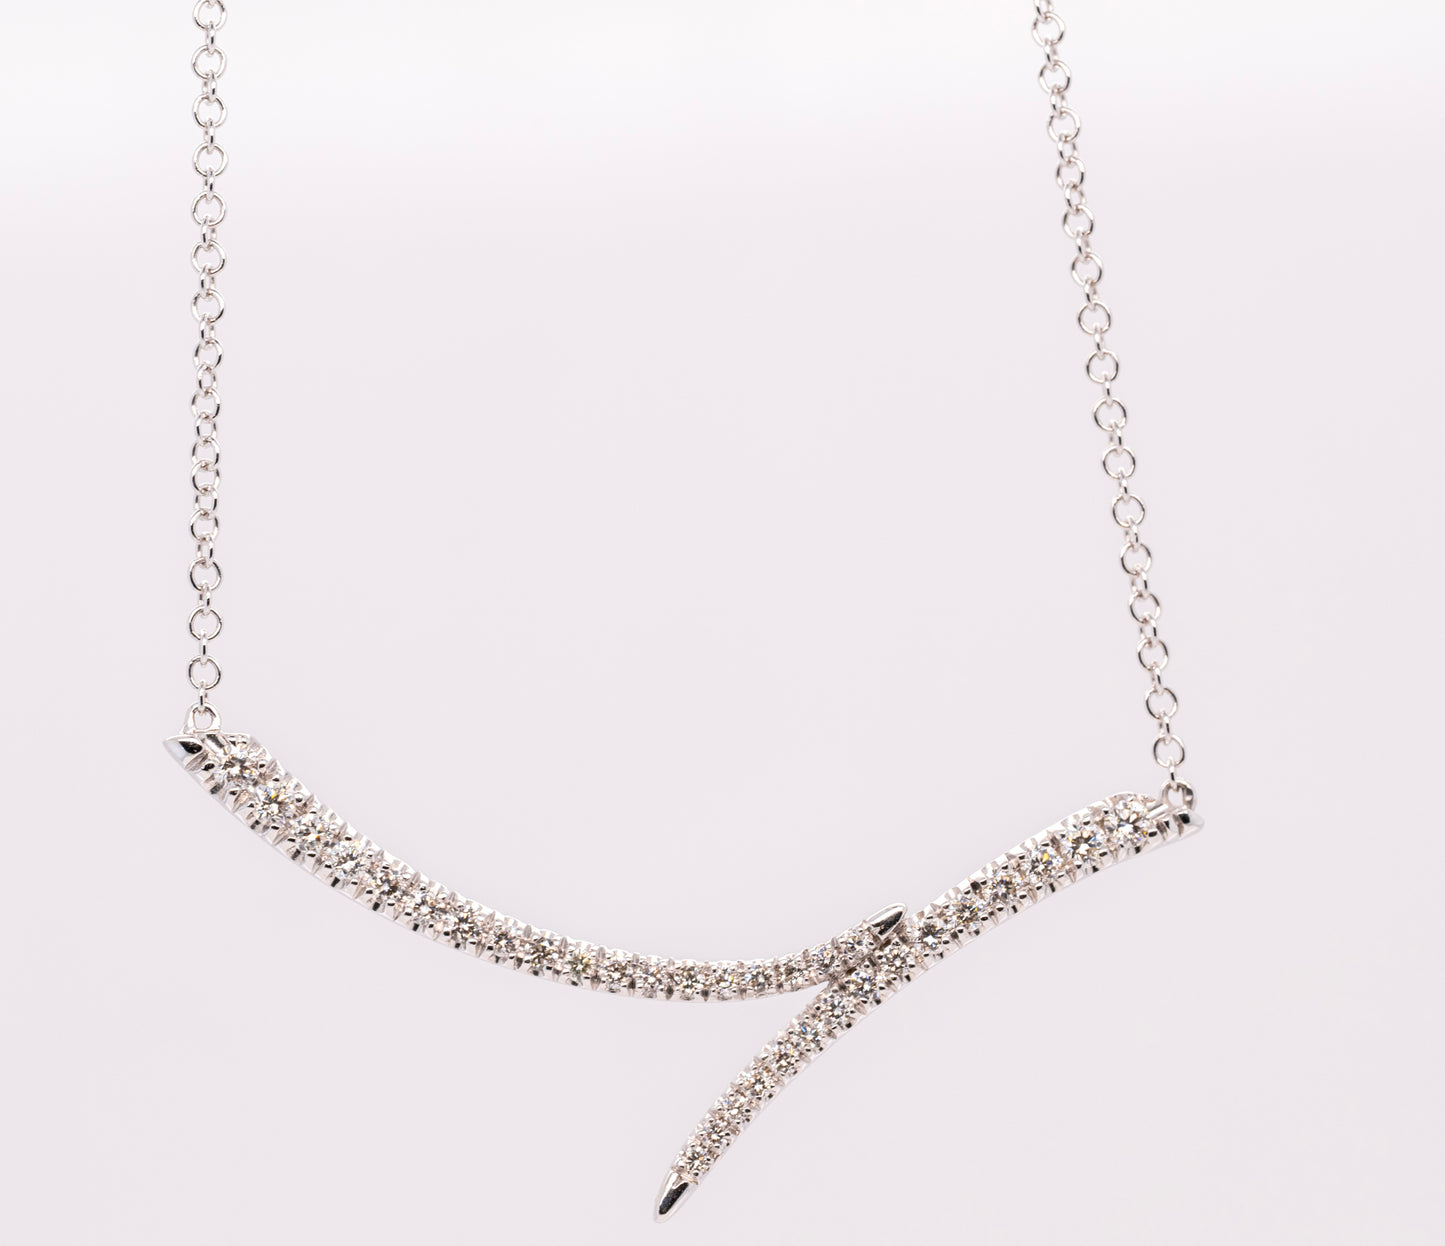 14K White Gold Curved Bypass Bar Necklace with Diamonds